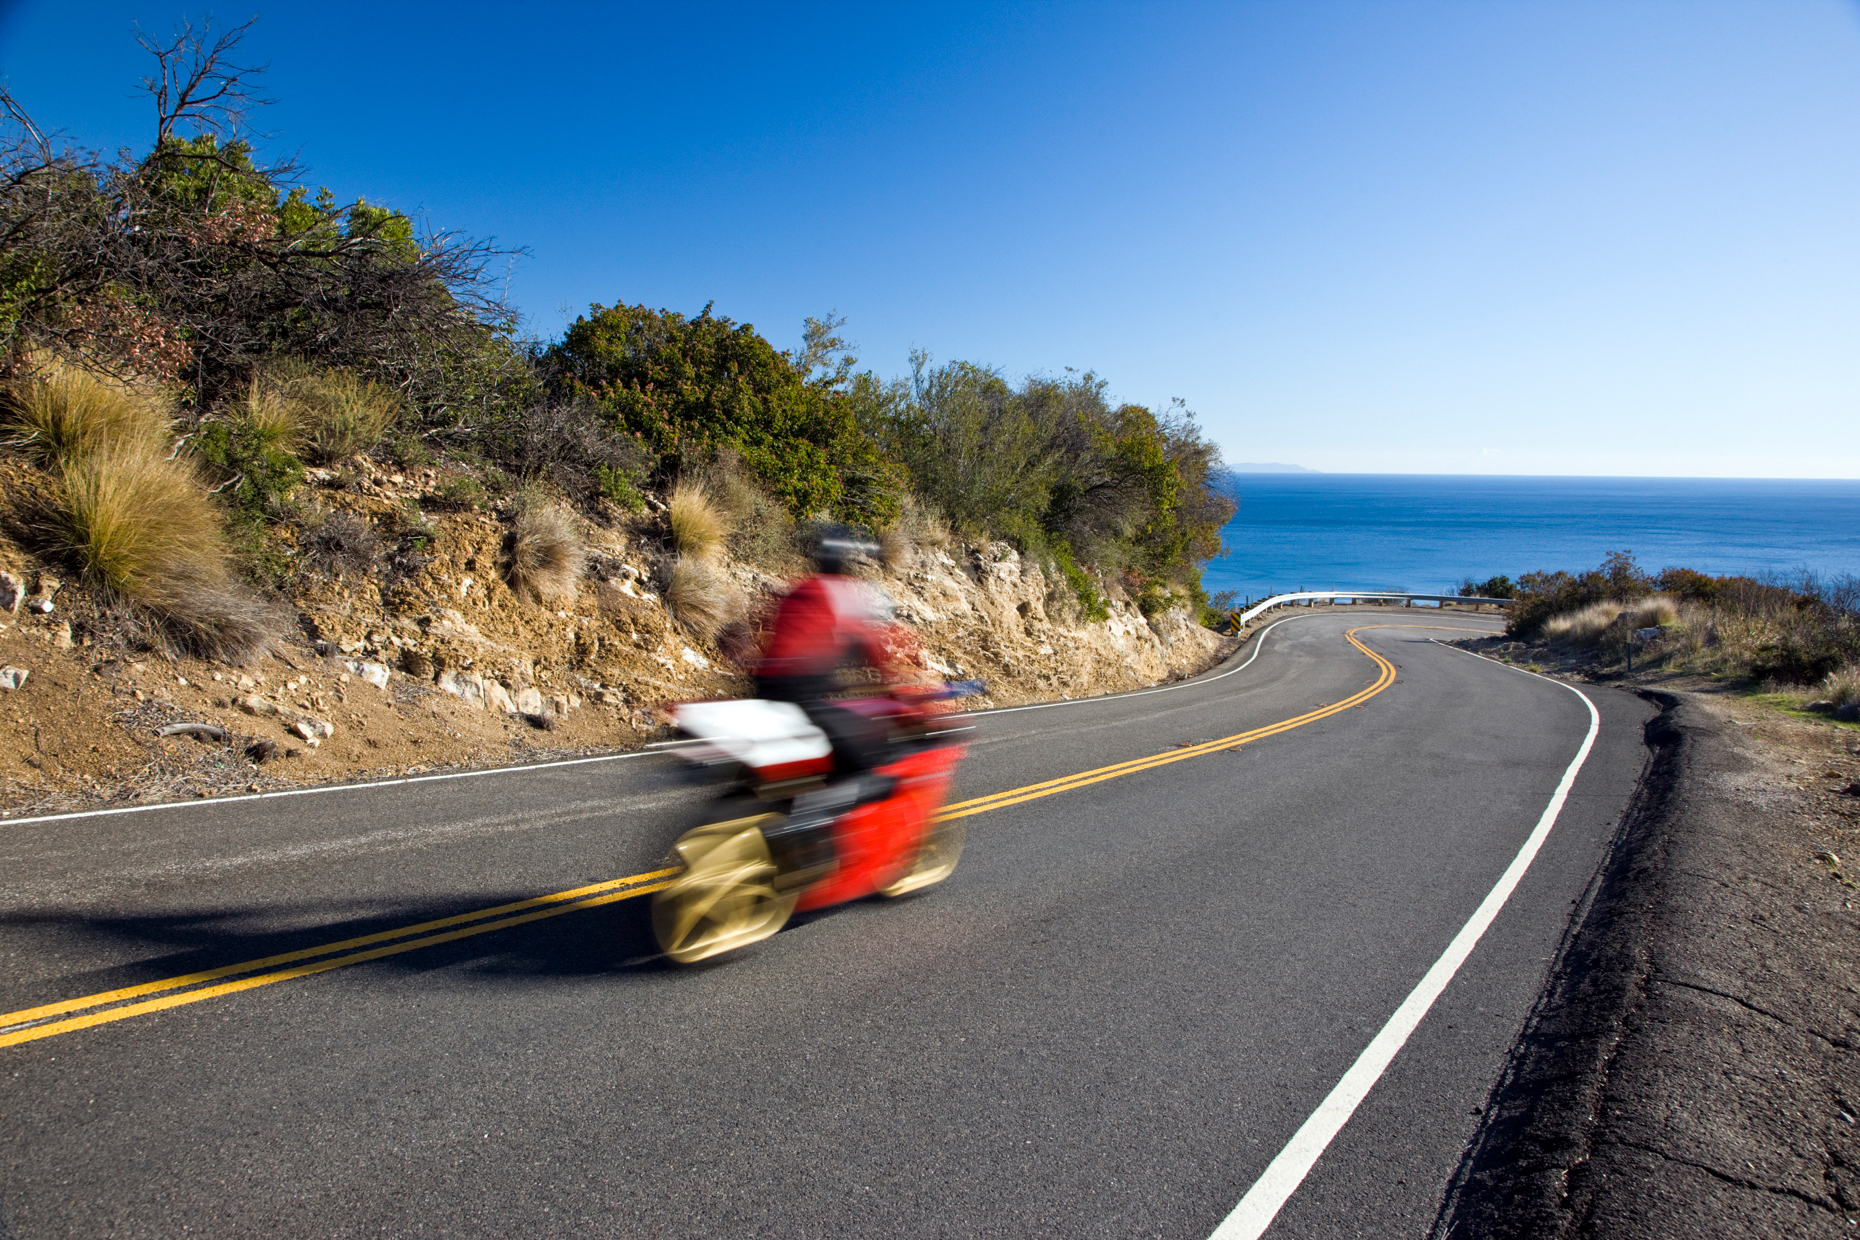 Action blur of a motorcycle rider on a road near Rt. 1 and Malibu, California, USA